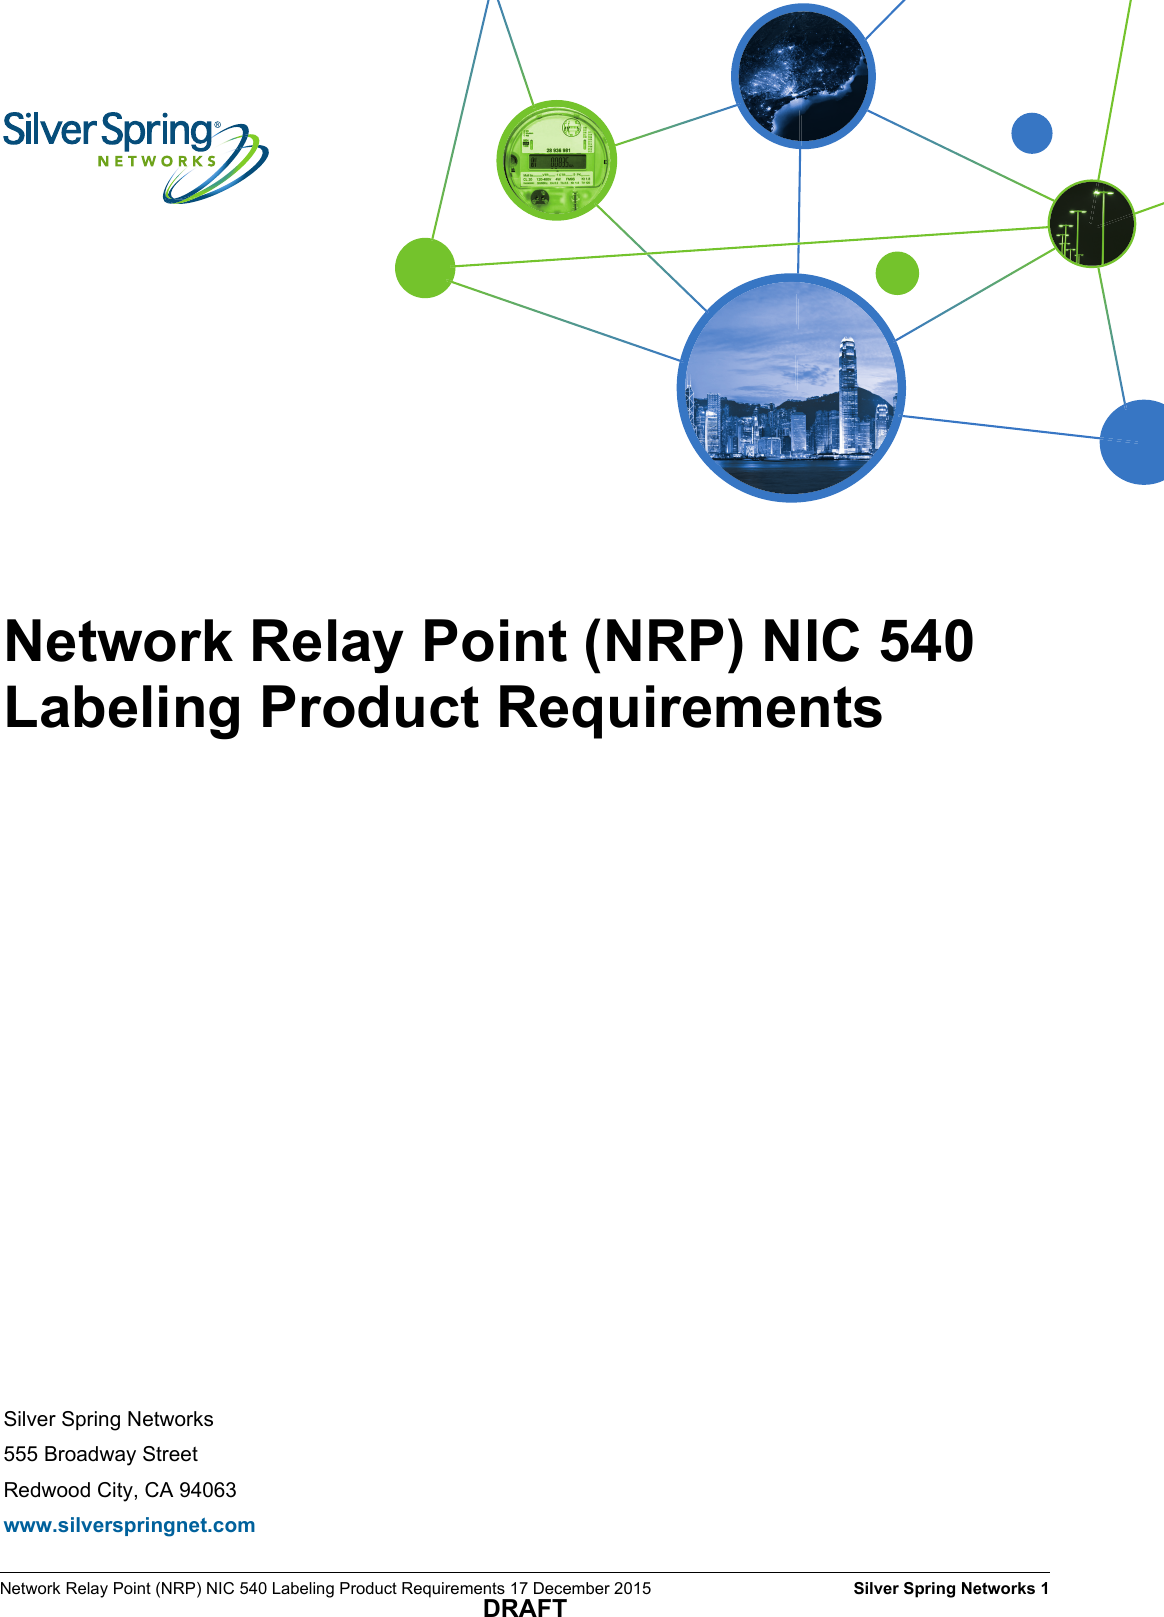 Network Relay Point (NRP) NIC 540 Labeling Product Requirements 17 December 2015    Silver Spring Networks 1DRAFTSilver Spring Networks555 Broadway StreetRedwood City, CA 94063www.silverspringnet.comNetwork Relay Point (NRP) NIC 540 Labeling Product Requirements